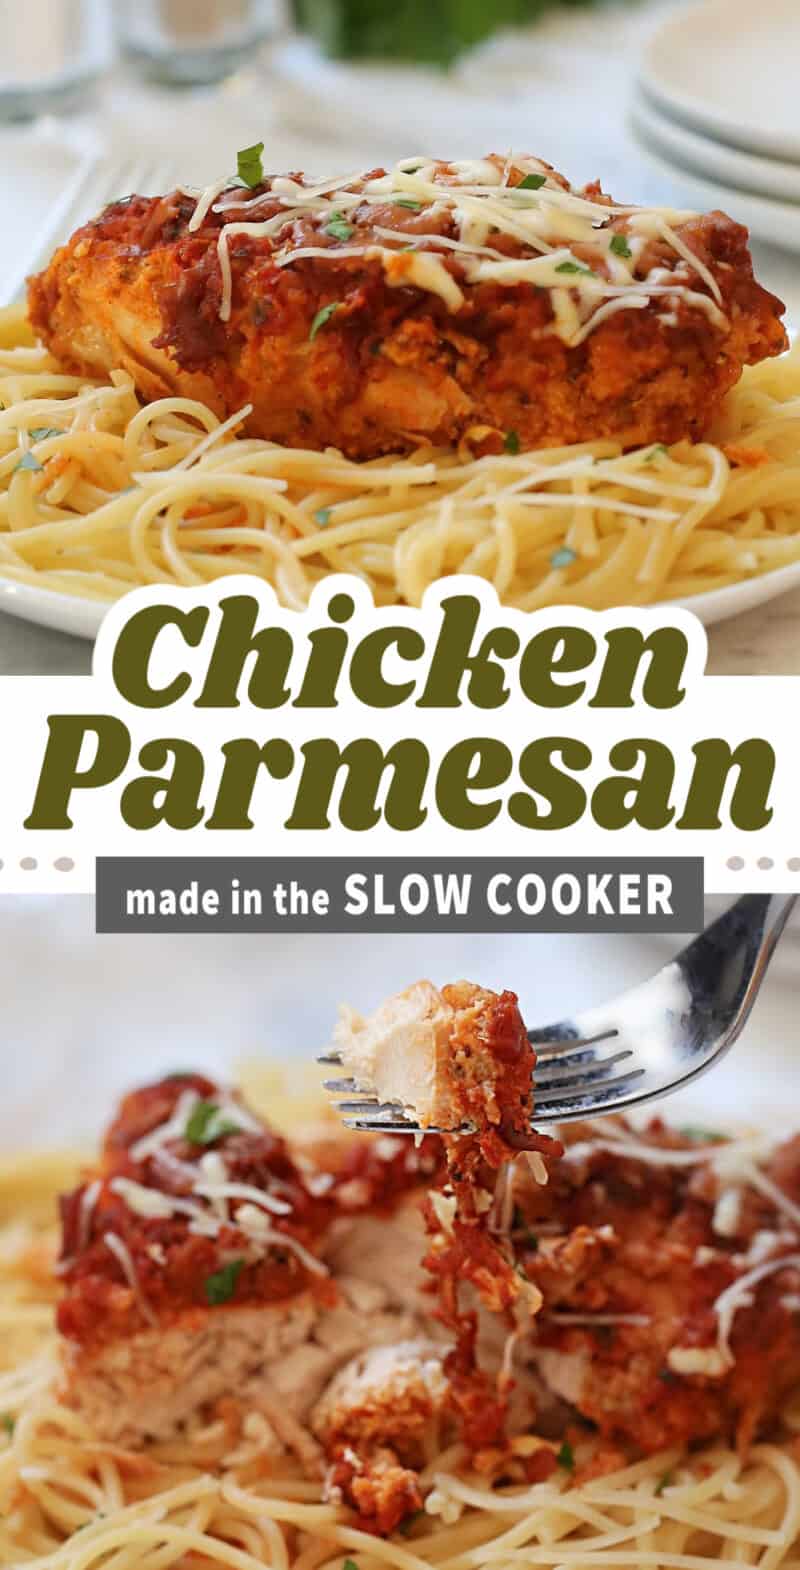 chicken parmesan with text